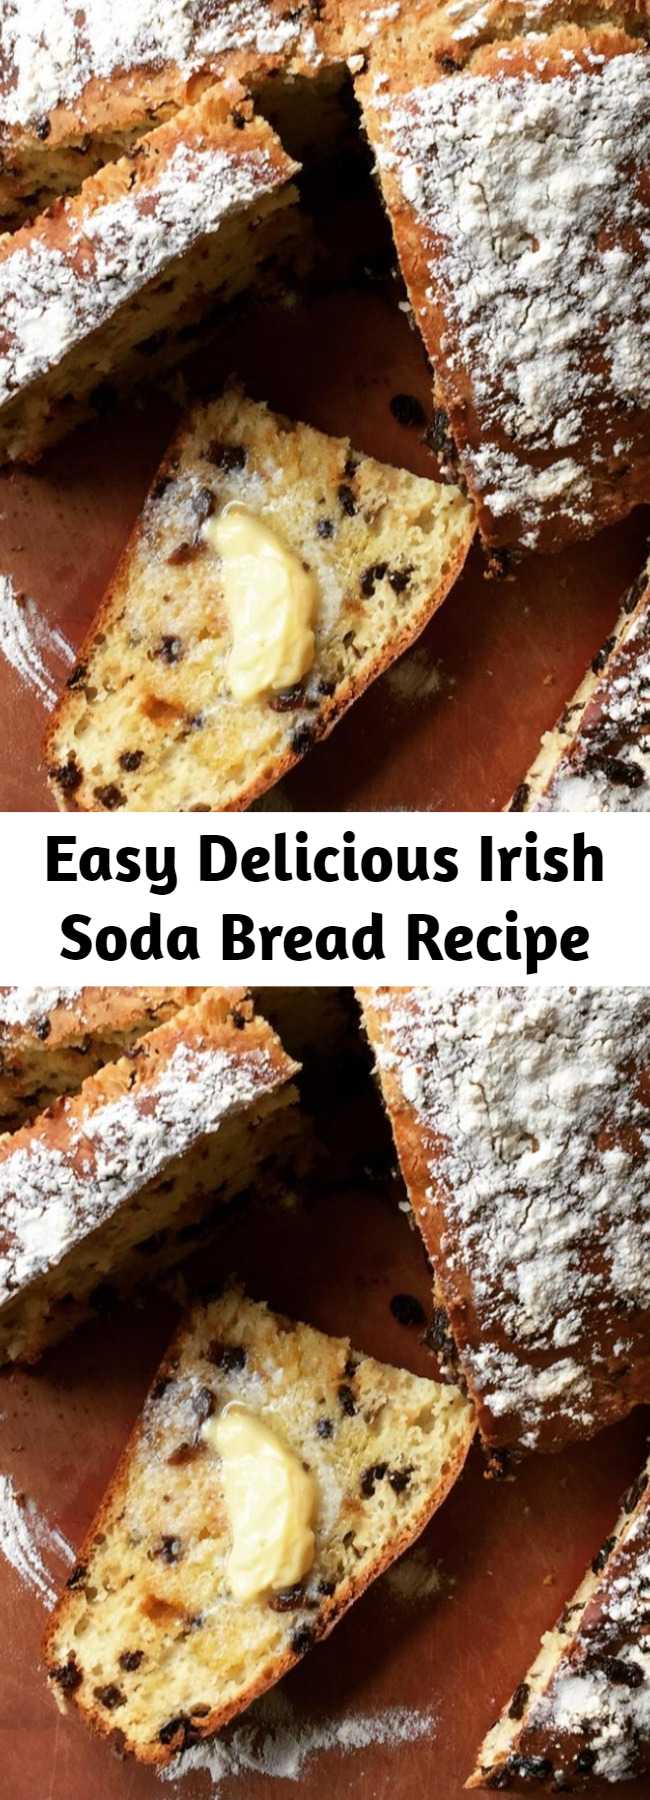 Easy Delicious Irish Soda Bread Recipe - I tried all the Irish soda bread recipes I could find. This was by far the best -- not just easy, but beautiful, amazingly moist and flavorful. I've made it over and over at the requests of family and friends. Toasts beautifully too, and wonderful with marmalade.